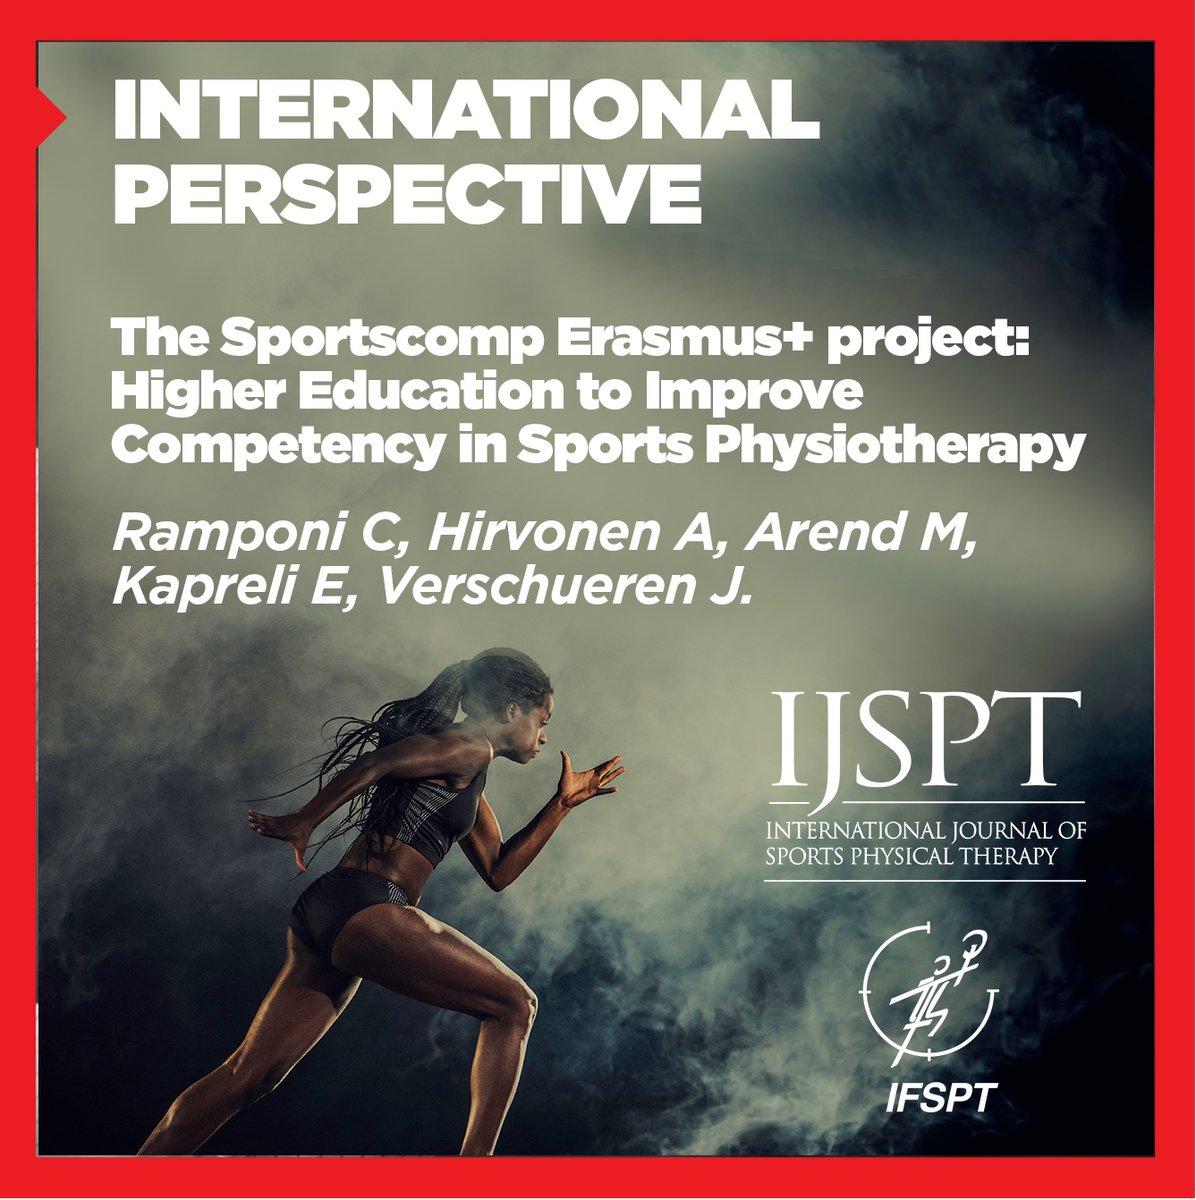 INTERNATIONAL PERSPECTIVE The Sportscomp Erasmus+ project: Higher Education to Improve Competency in Sports Physiotherapy Ramponi C, Hirvonen A, Arend M, Kapreli E, Verschueren J. READ HERE: ijspt.org/the-sportscomp…